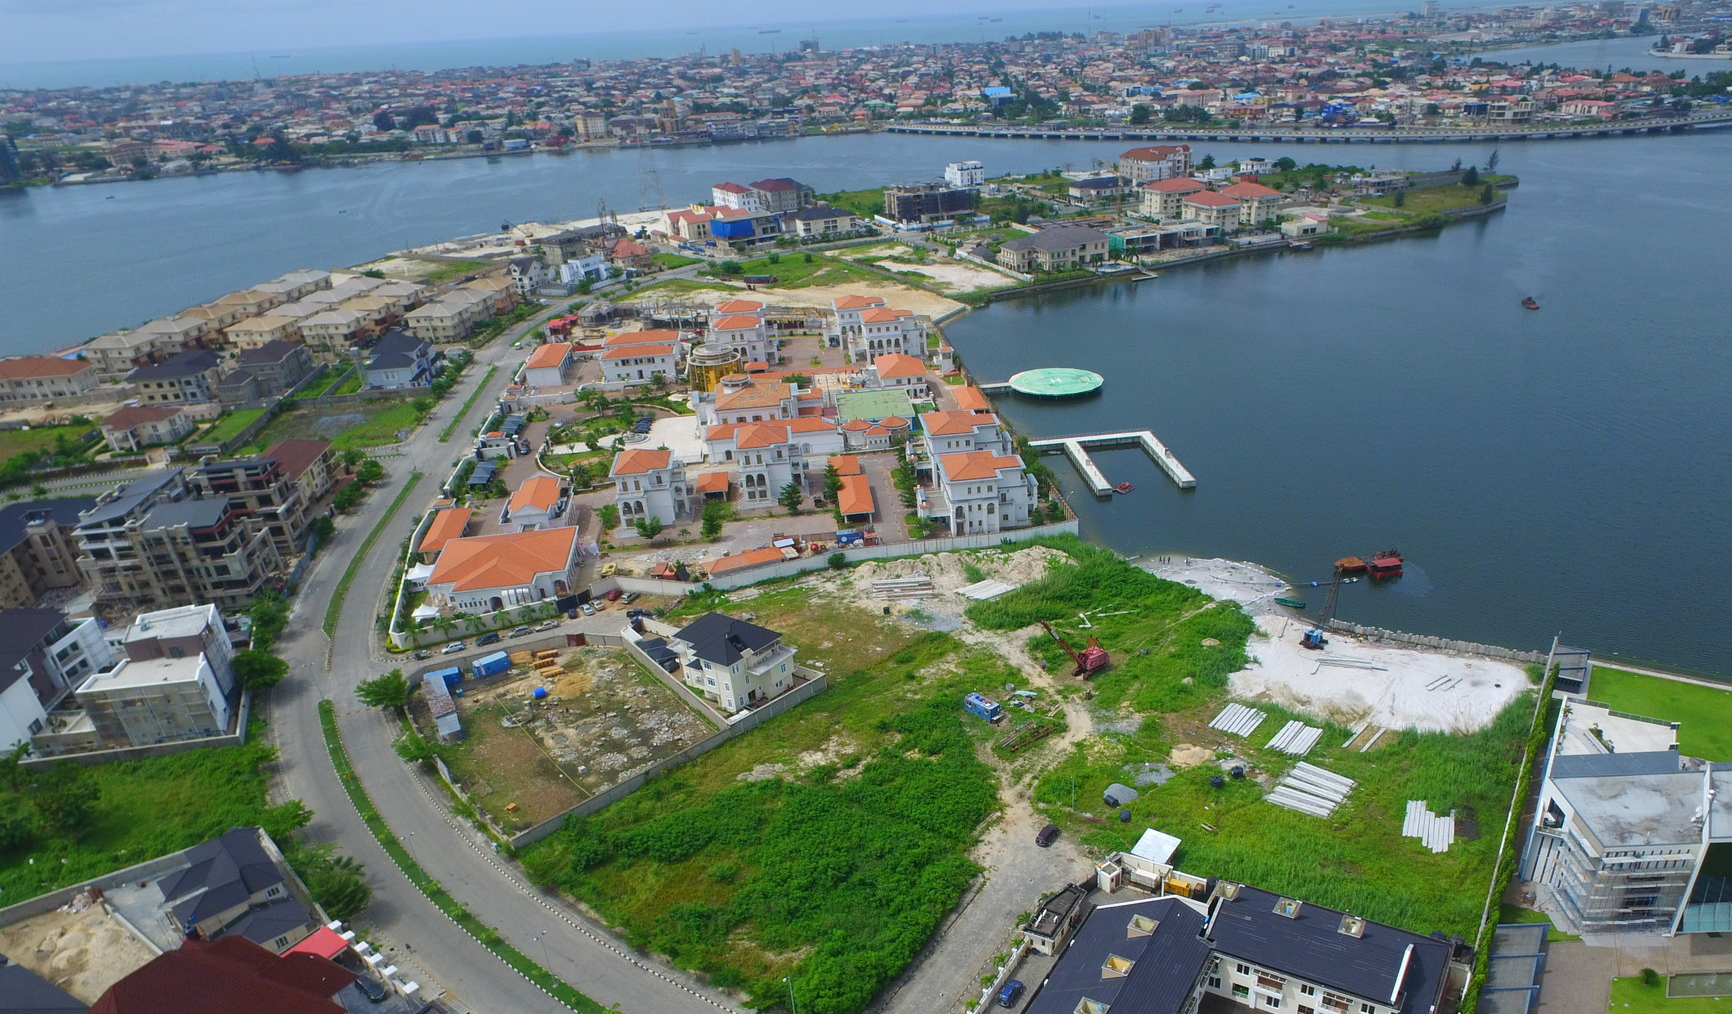 Why Invest in Banana Island, Lagos? Explore Luxury Real Estate Options with African Land